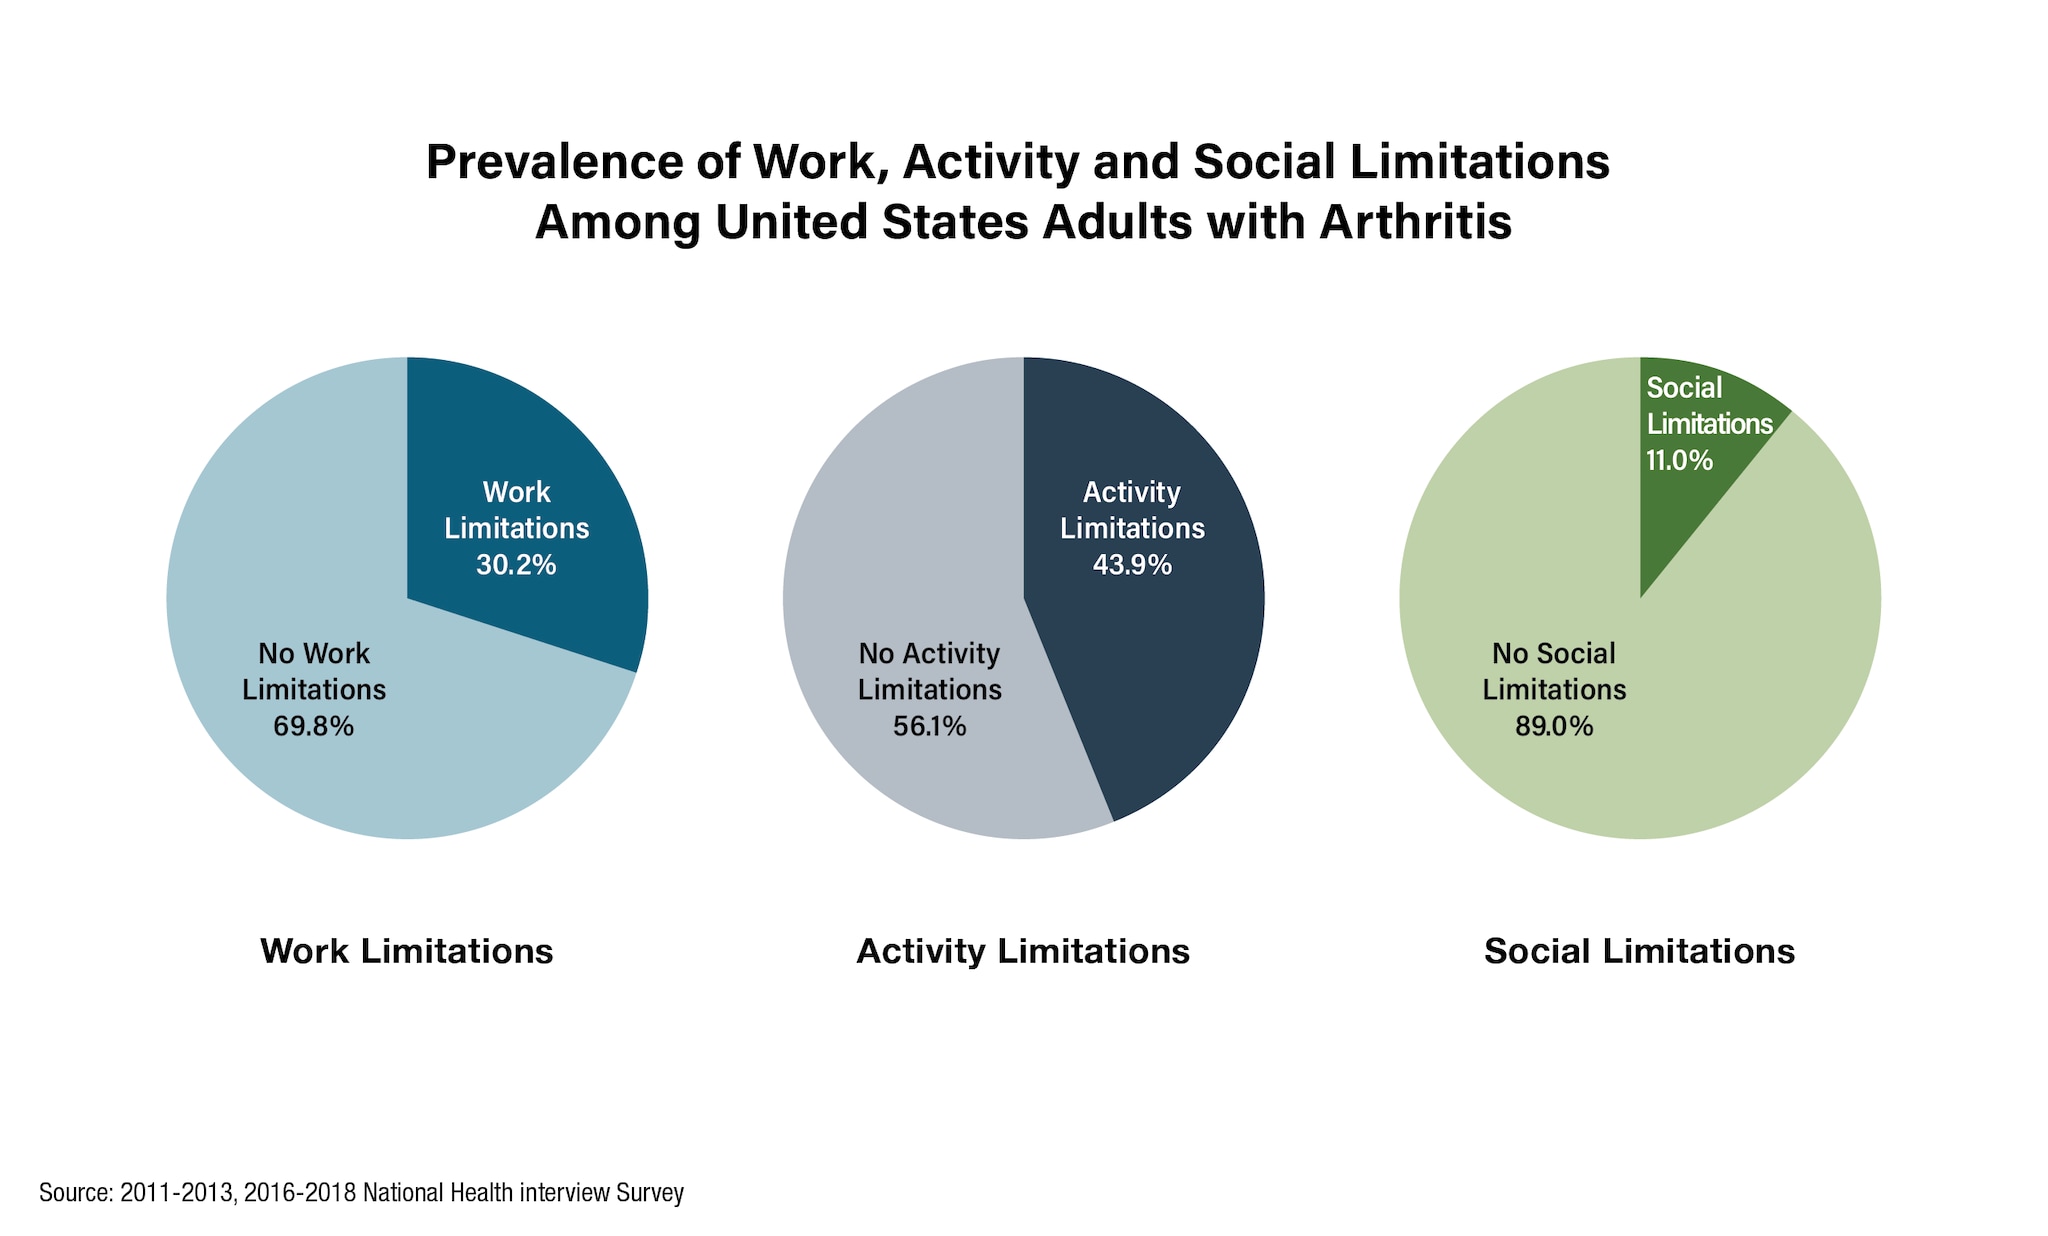 Prevalence of Work, Activity and Social Limitations Among United States Adults with Arthritis